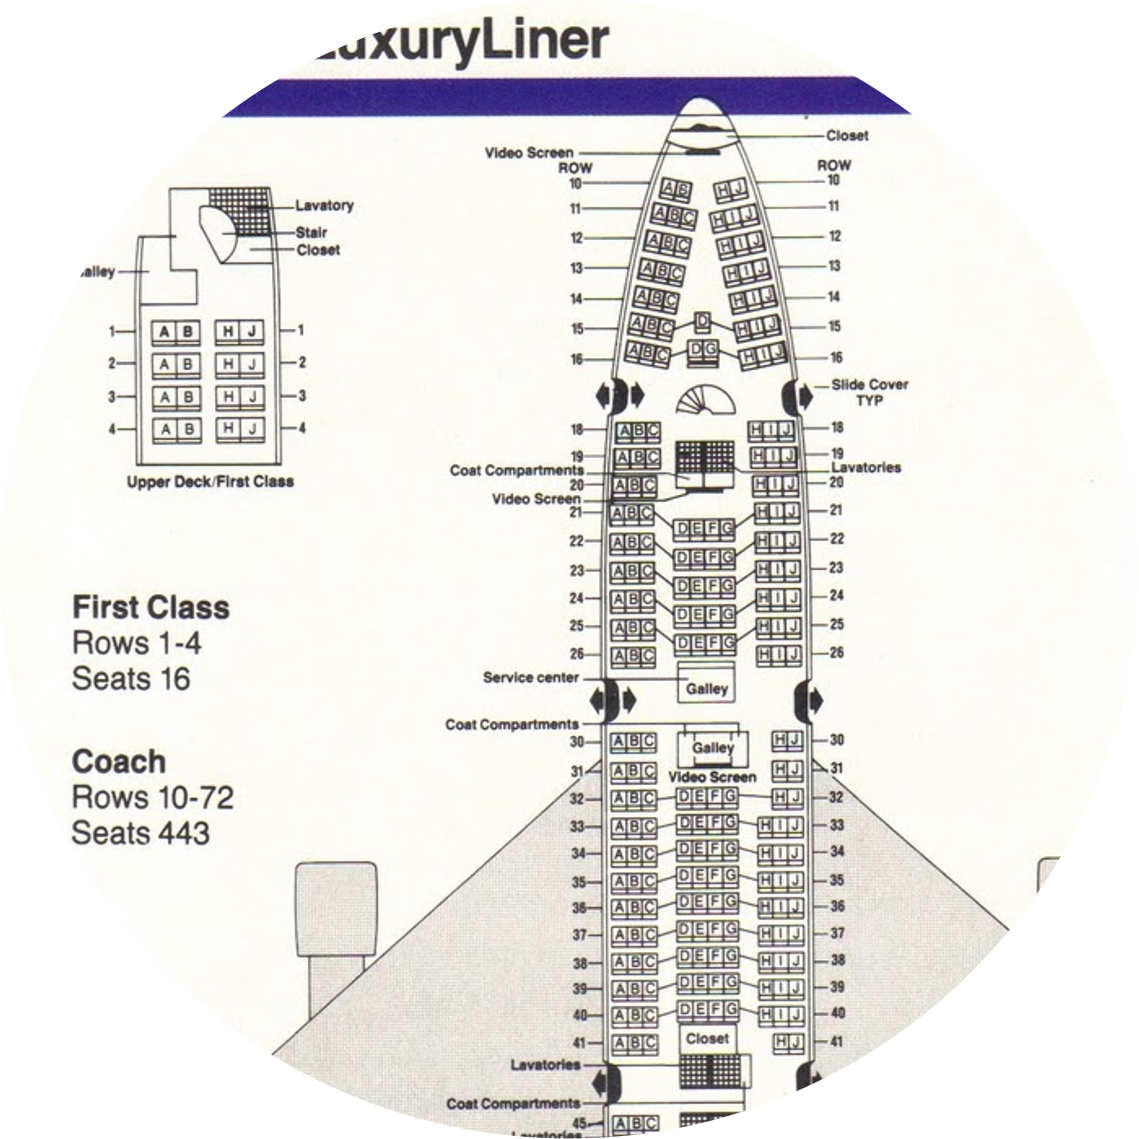 American Airlines Boeing 747 LuxuryLiner seating chart, published in 1983.  Credit to Airlines Past and Present